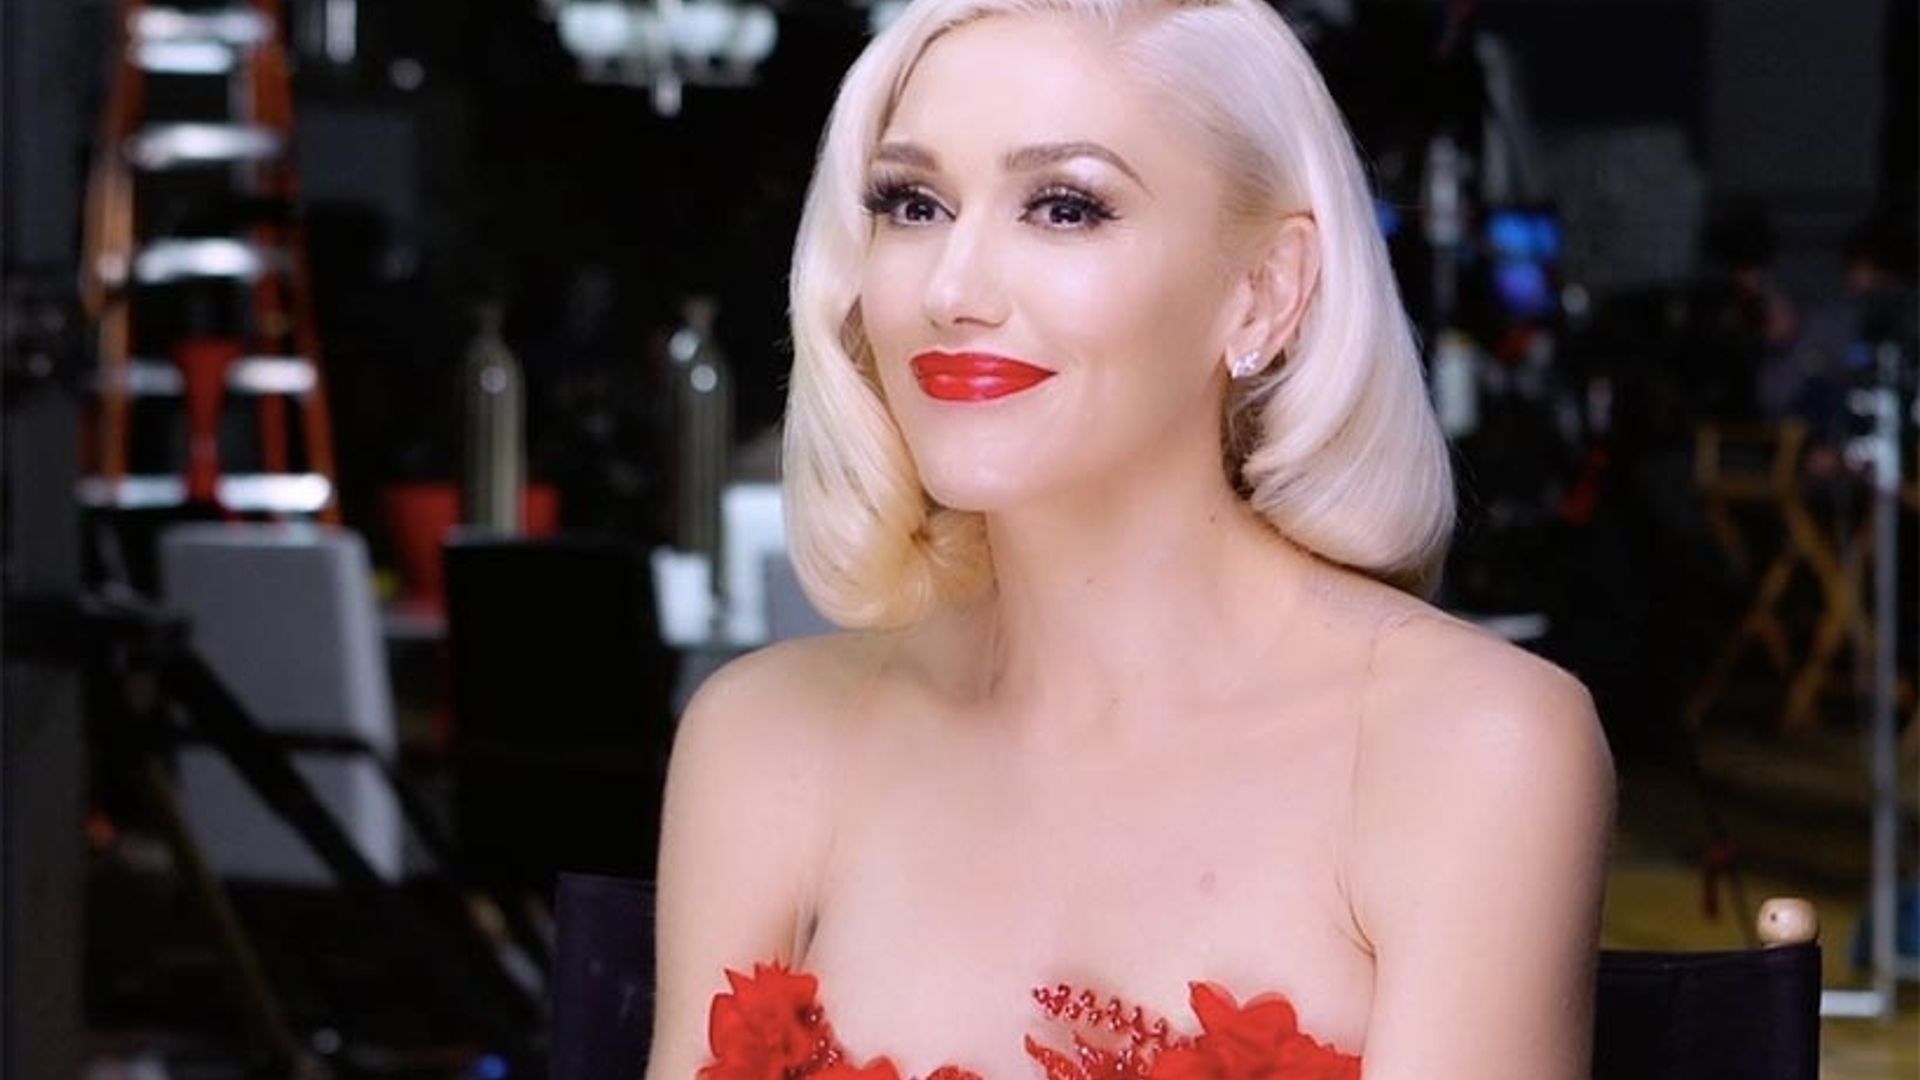 Gwen Stefani opens up about her new beauty gig and reveals her New Year's resolution